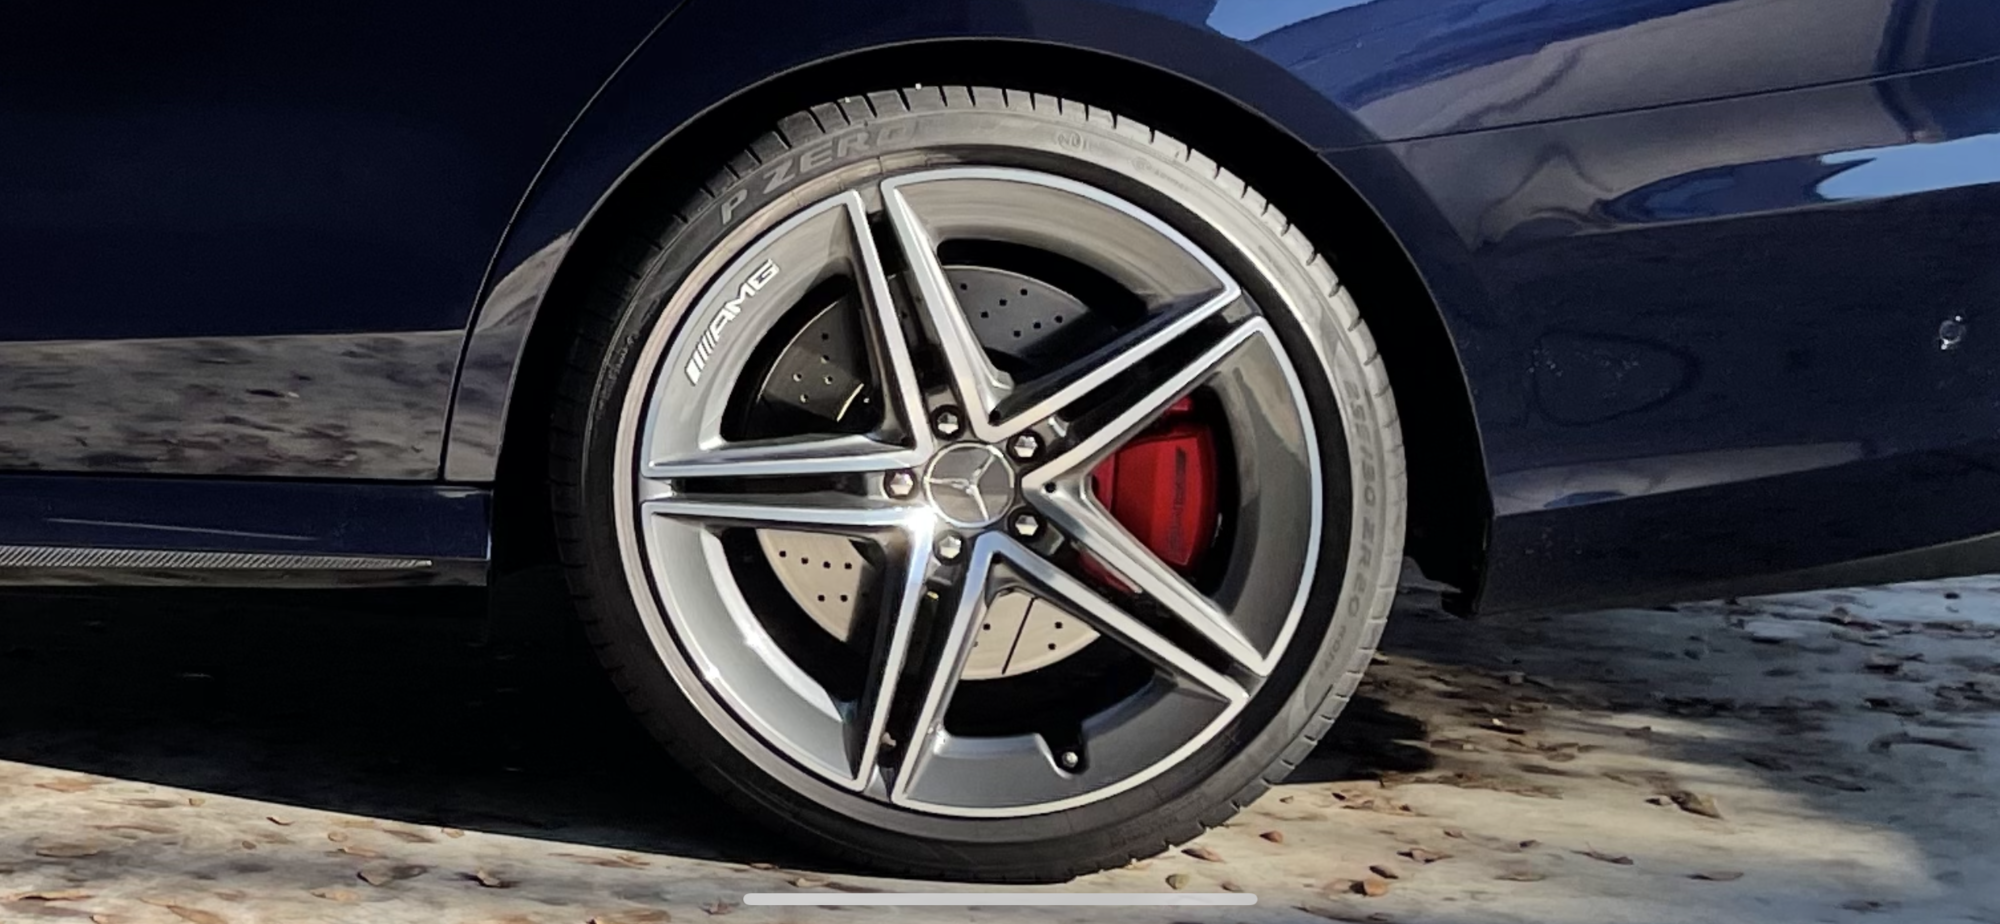 Wheels and Tires/Axles - 2021 E63 AMG Five spoke wheel with gray accents - Used - All Years Mercedes-Benz E63 AMG - All Years Mercedes-Benz E63 AMG S - El Dorado Hills, CA 95762, United States